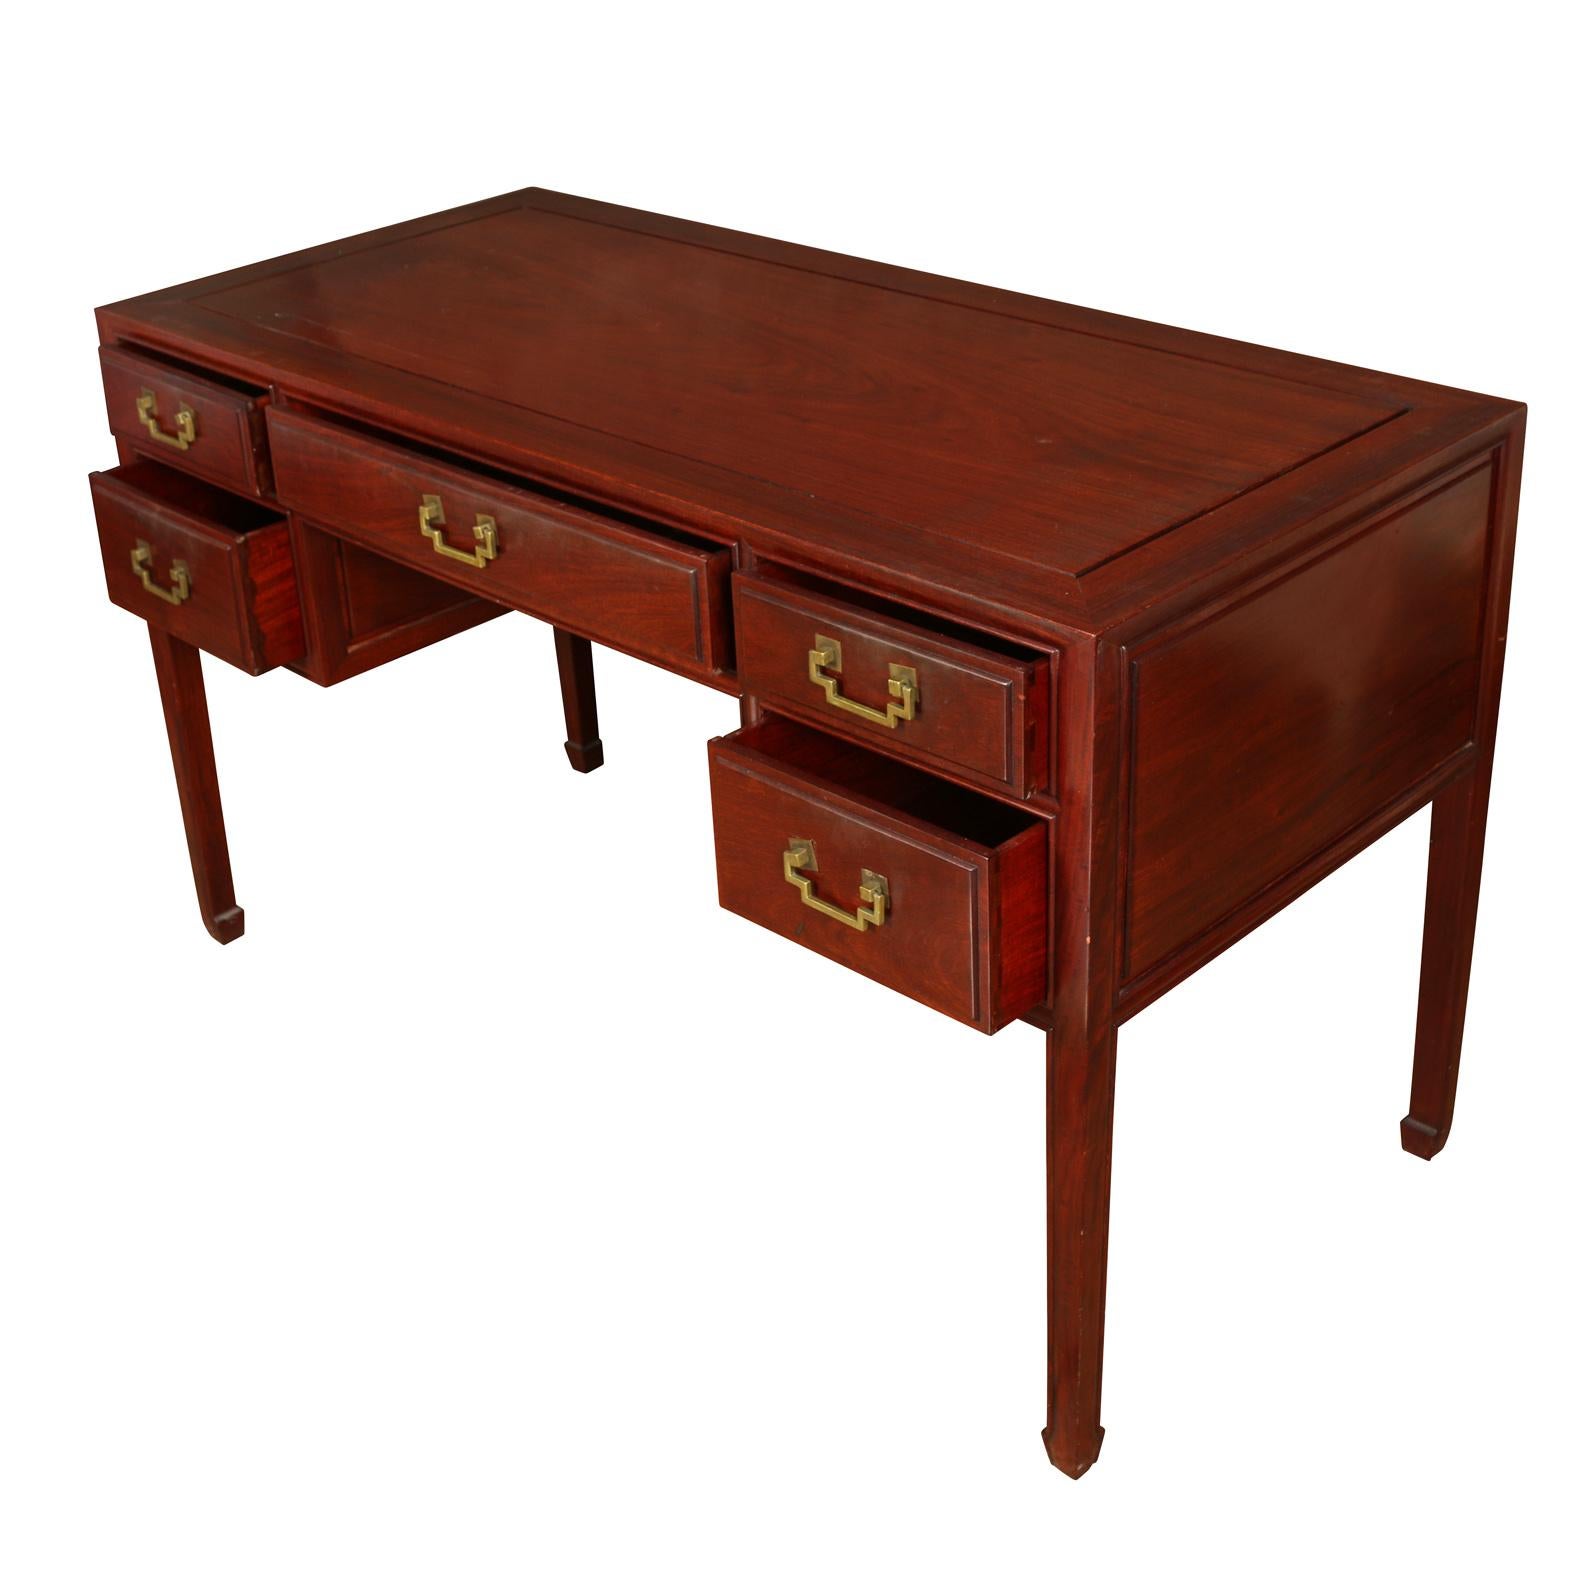 Asian style cherry five drawer desk with Asian style brass hardware.